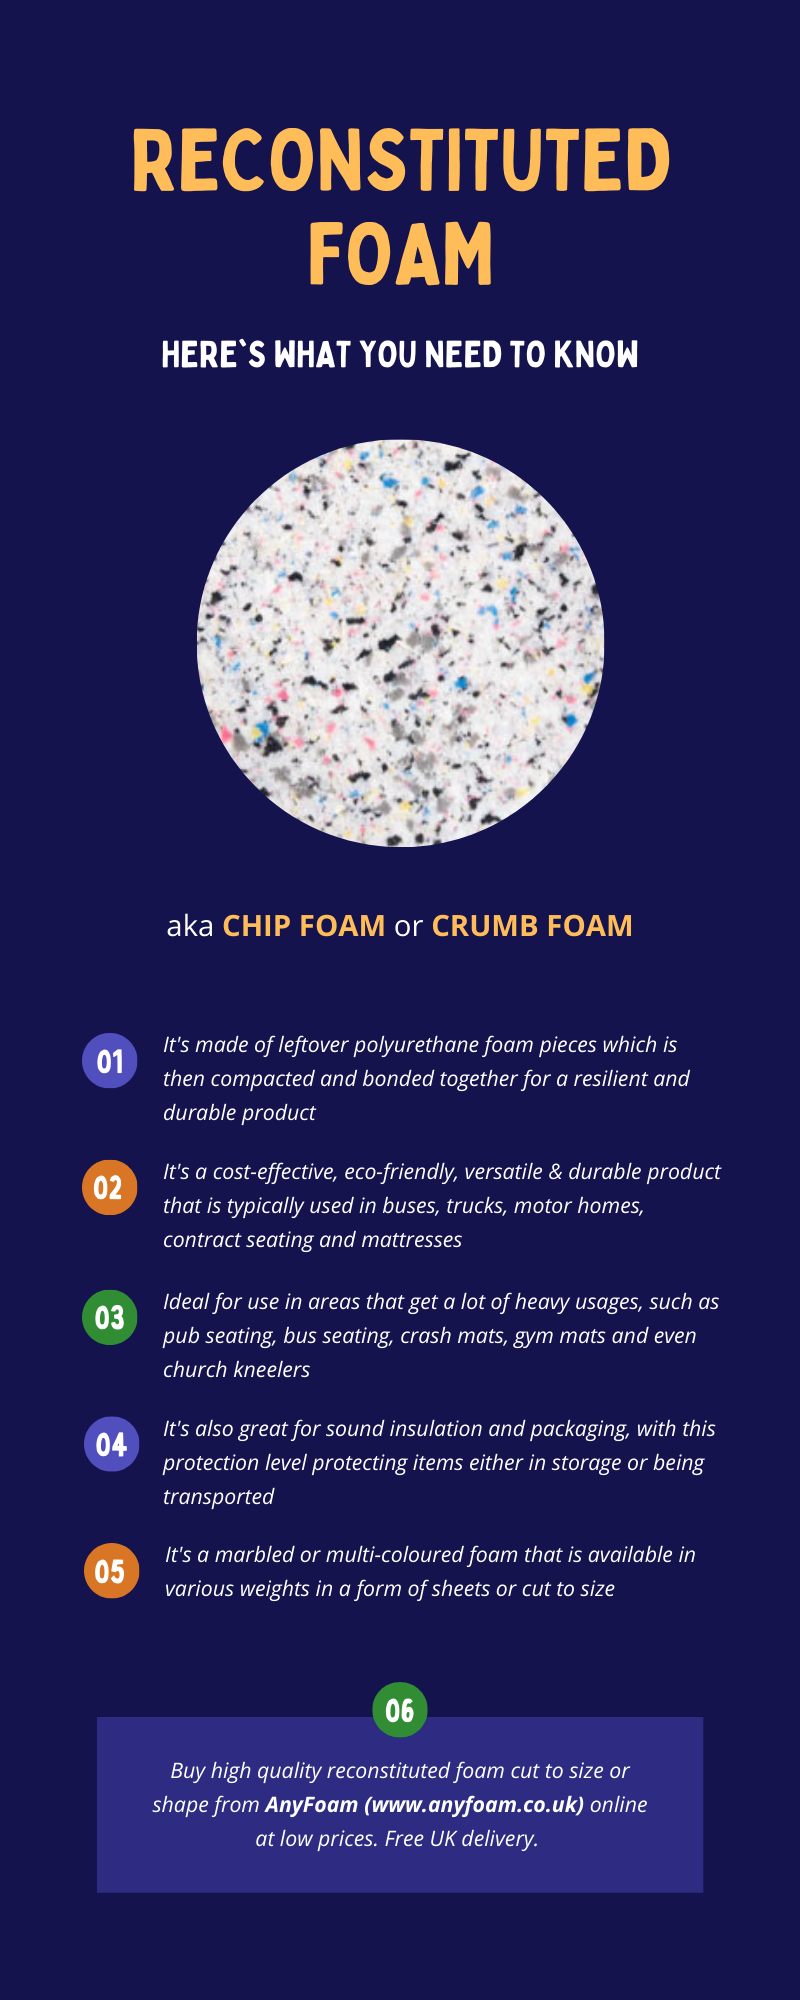 https://www.anyfoam.co.uk/img/blog/reconstituted-foam-infographic.png